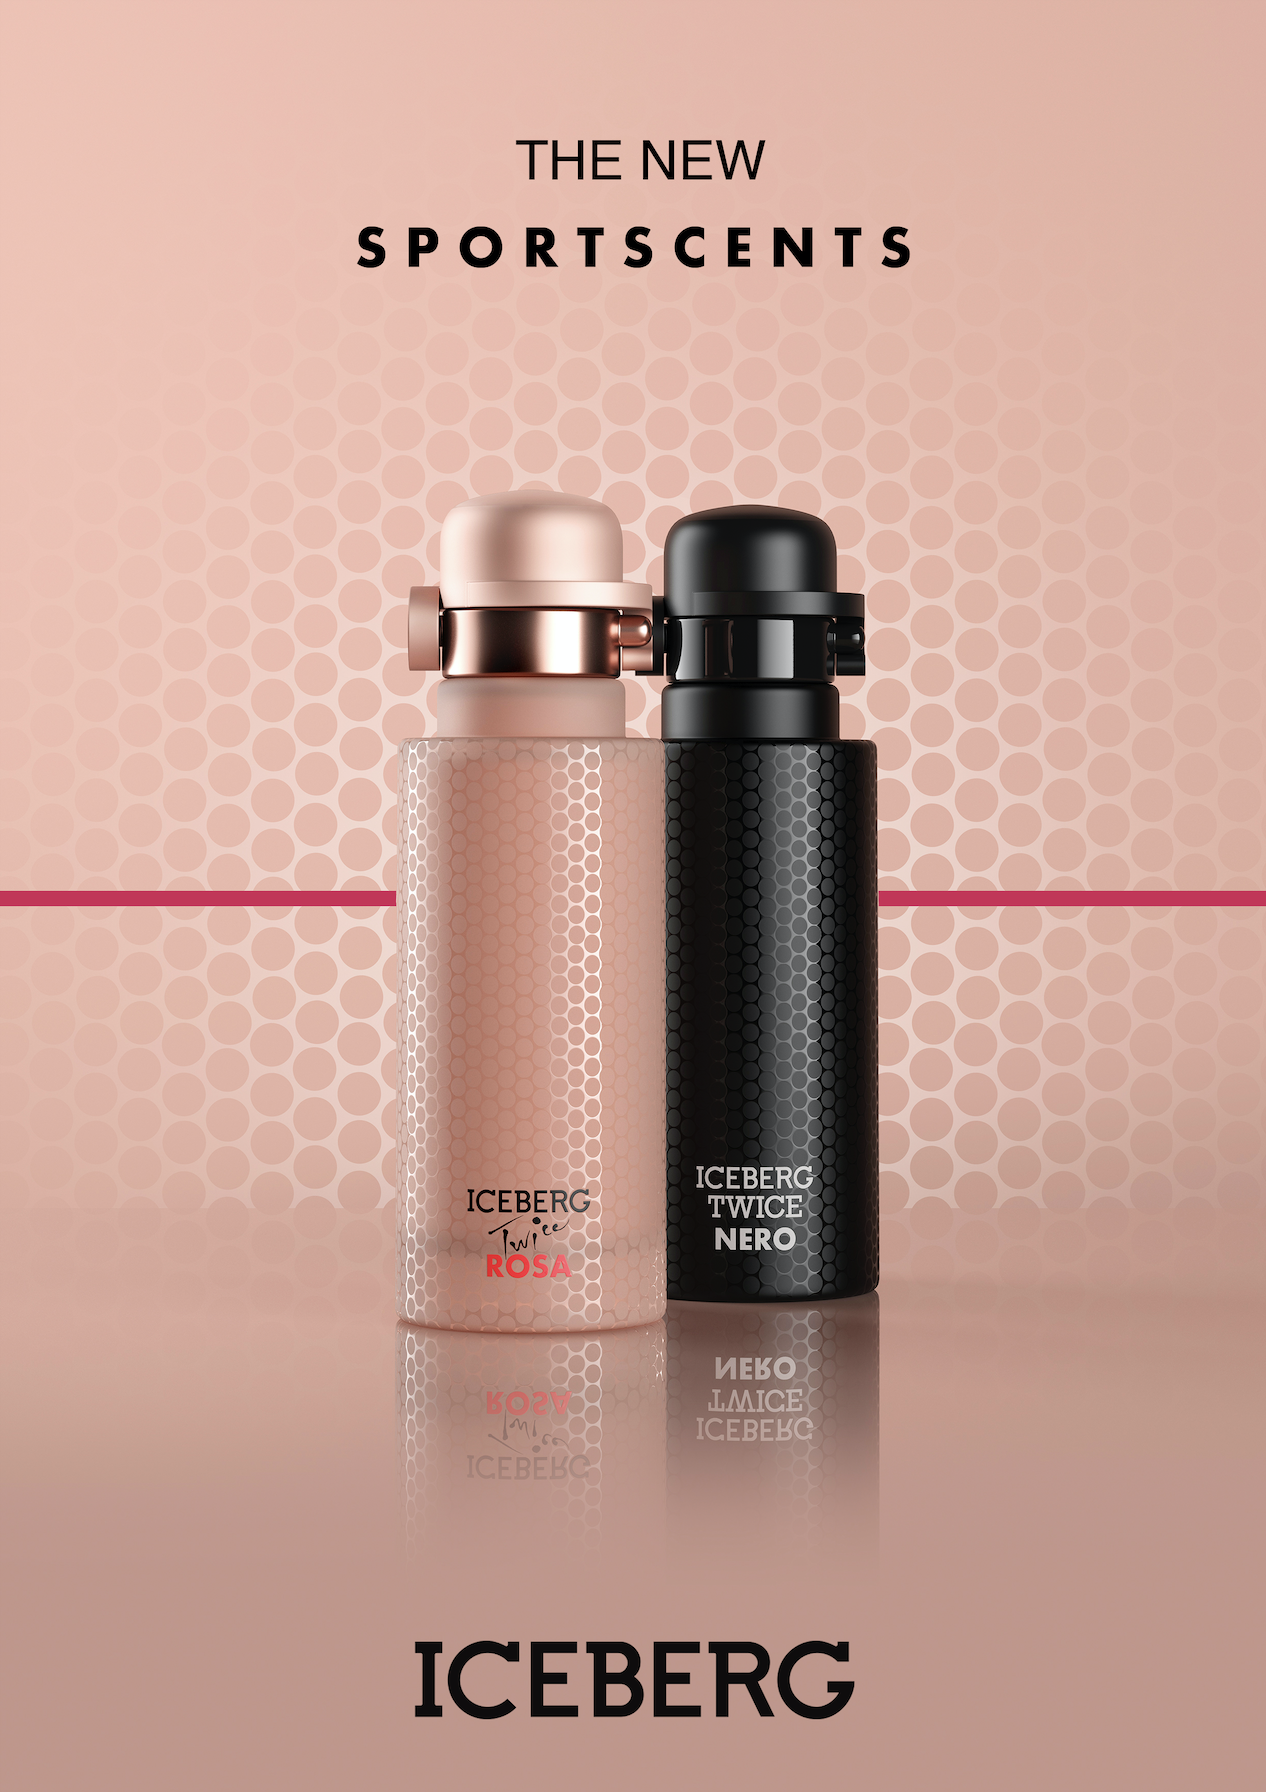 New Sportscents by Iceberg: Twice Rosa and Nero ~ New Fragrances